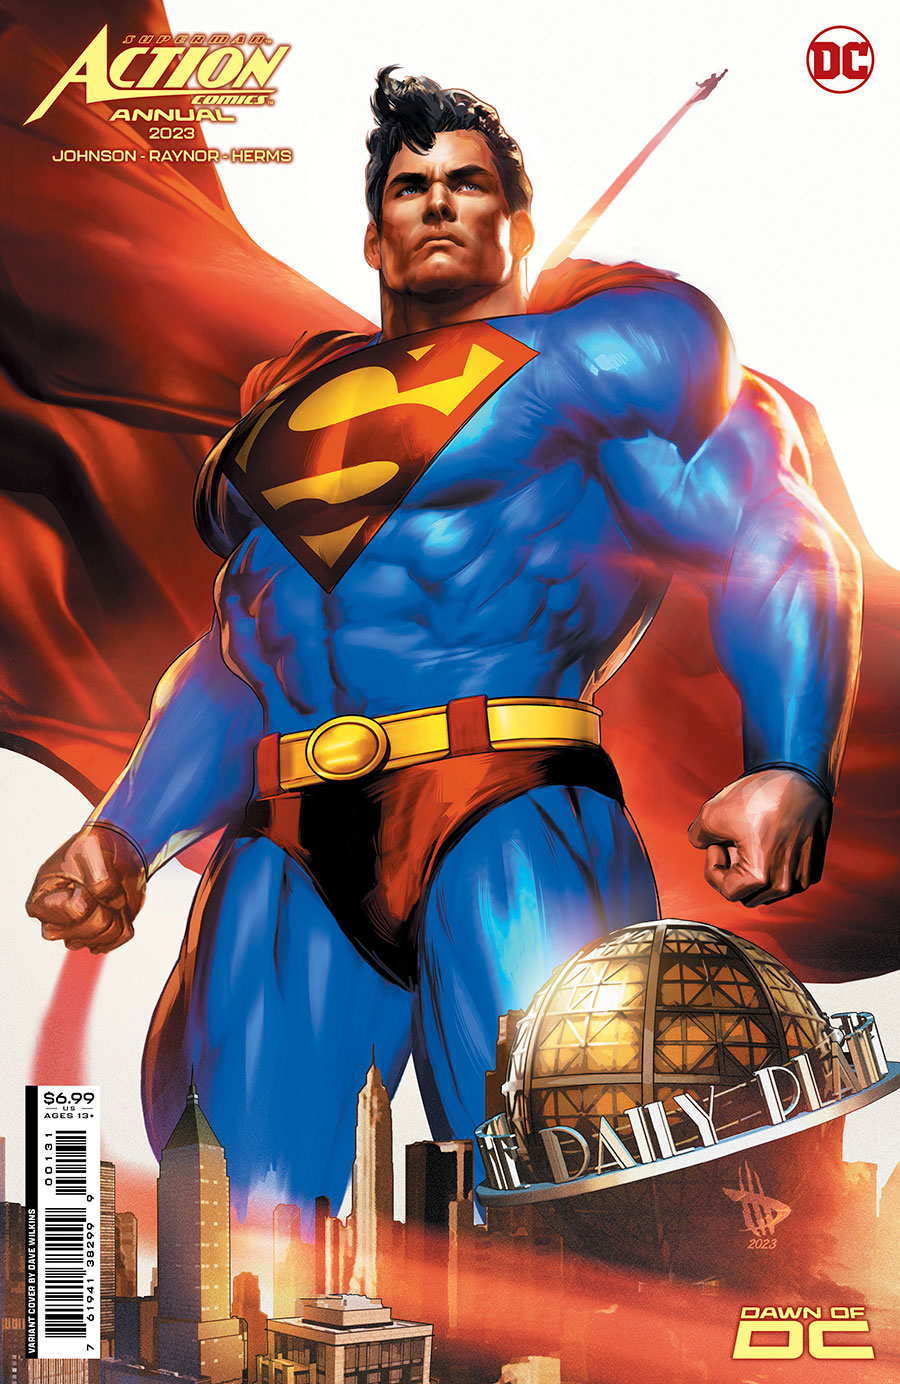 Action Comics Vol 2 2023 Annual (One Shot) #1 Cover C Variant Dave Wilkins Card Stock Cover